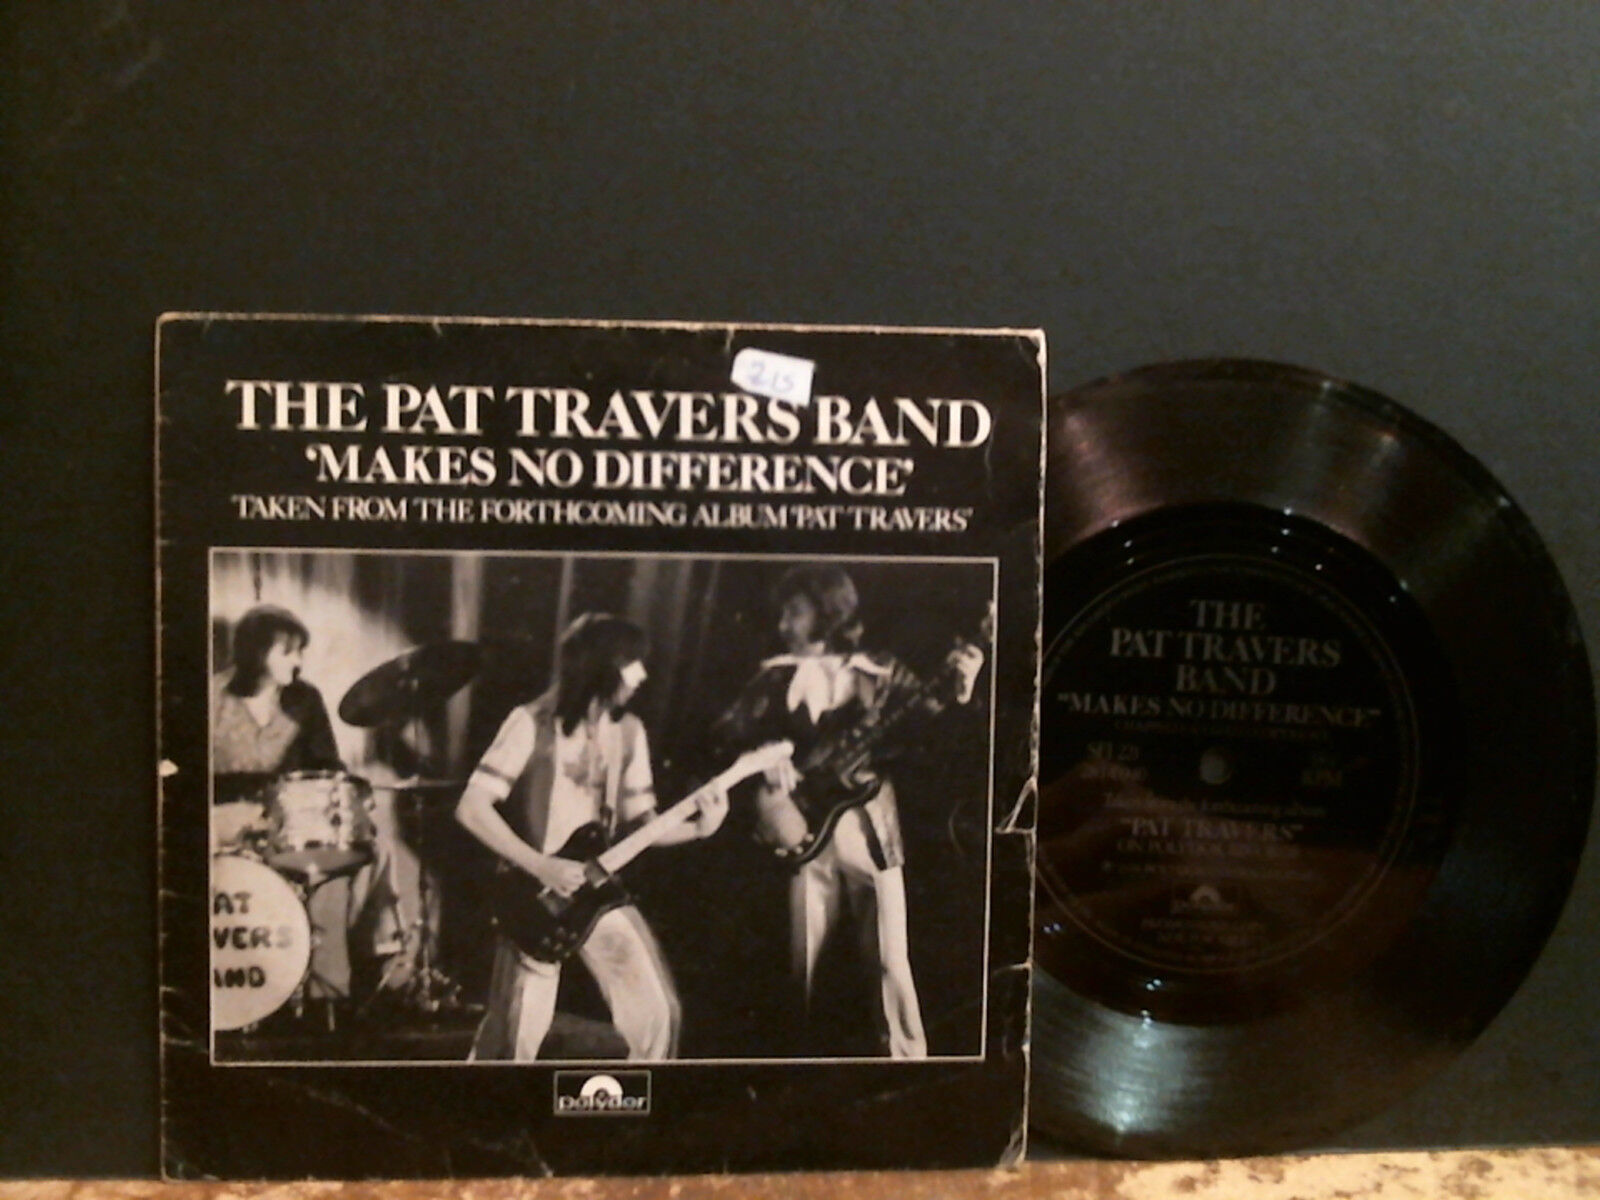 Pat travers band makes no difference flexi